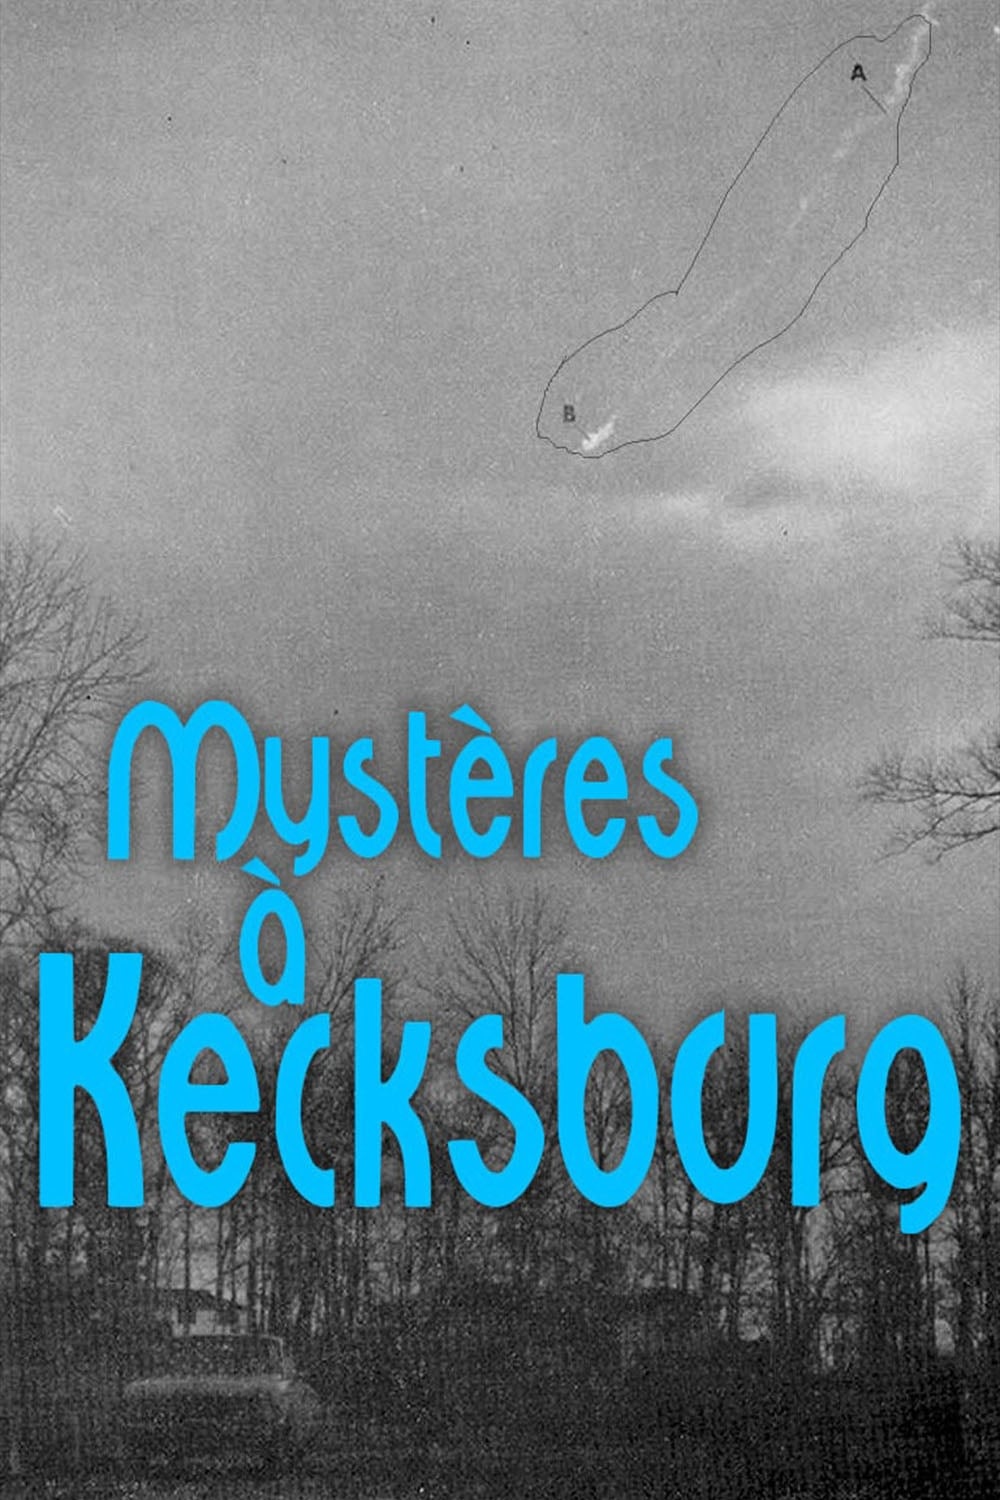 The New Roswell: Kecksburg Exposed